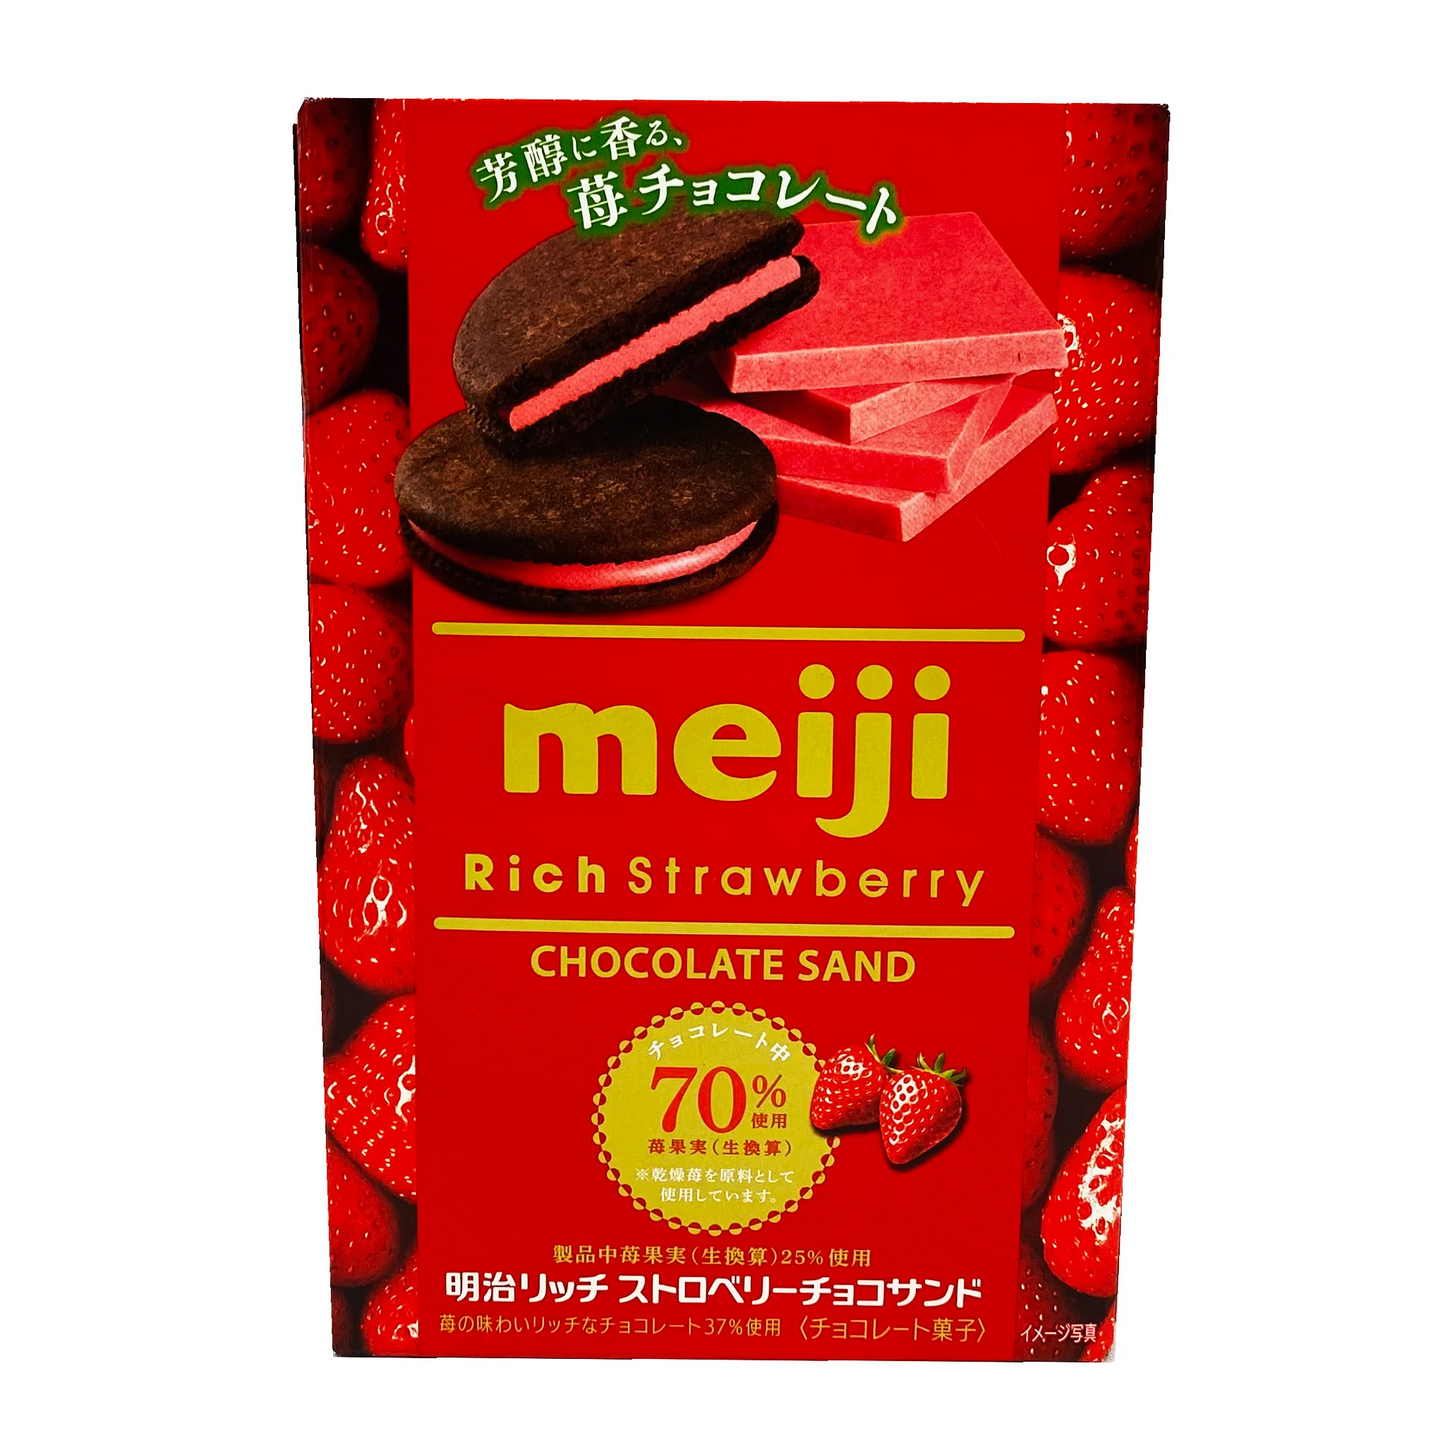 Meiji - Rich Strawberry Chocolate Sand (Biscuit) - Product of Japan